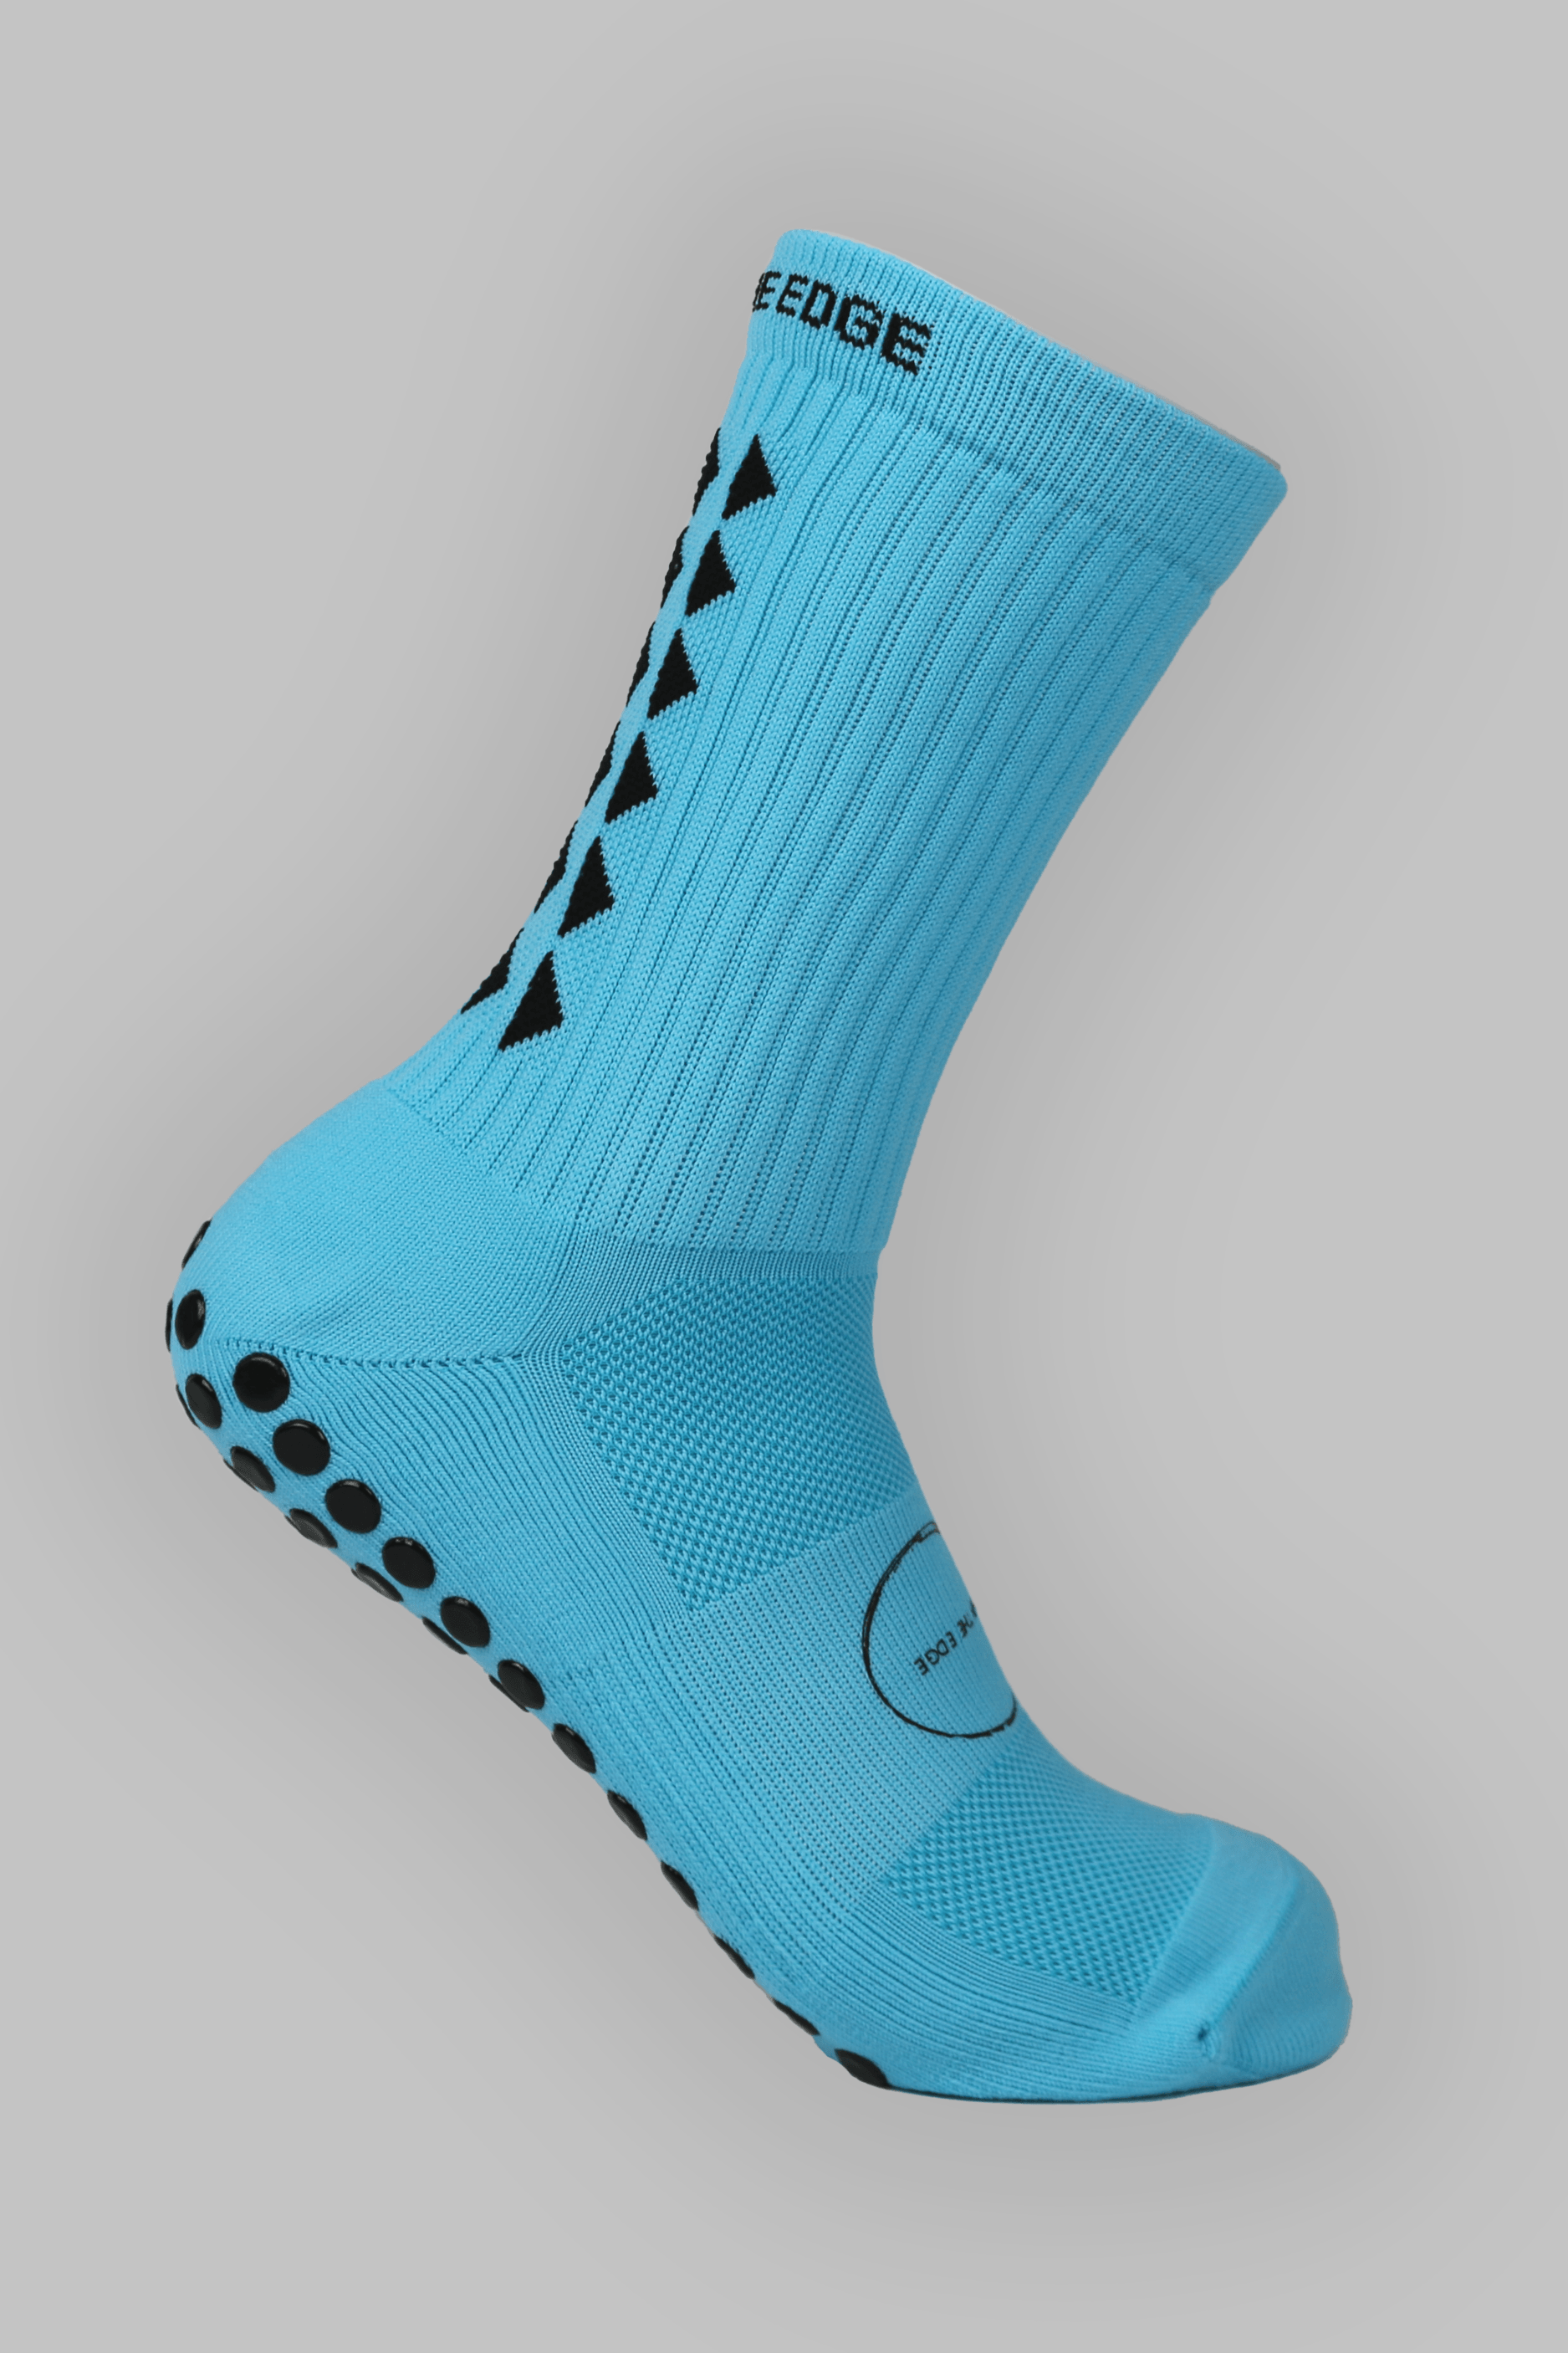 LIMITED EDITION GRIP SOCKS 2.0 - Turquoise - Gain The Edge Official